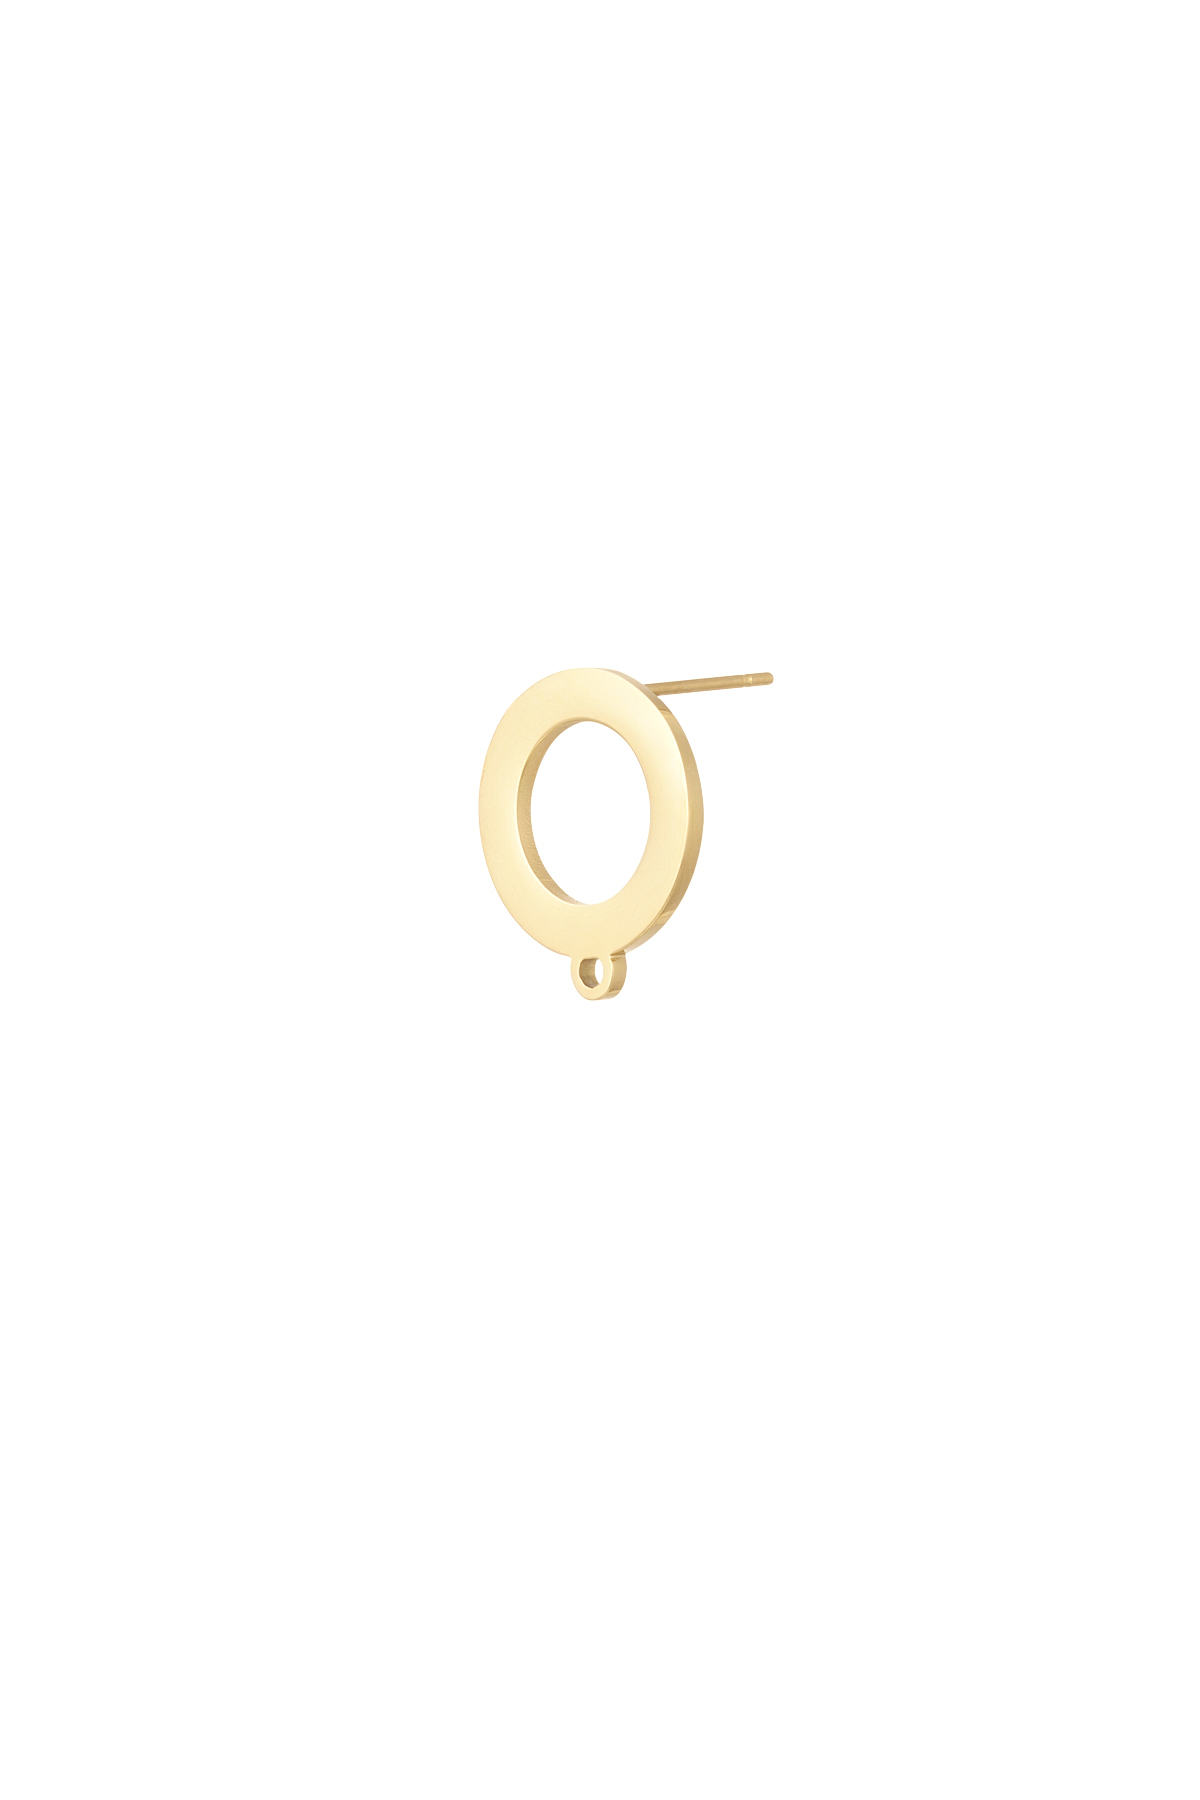 Ear stud part circle - gold Stainless Steel 